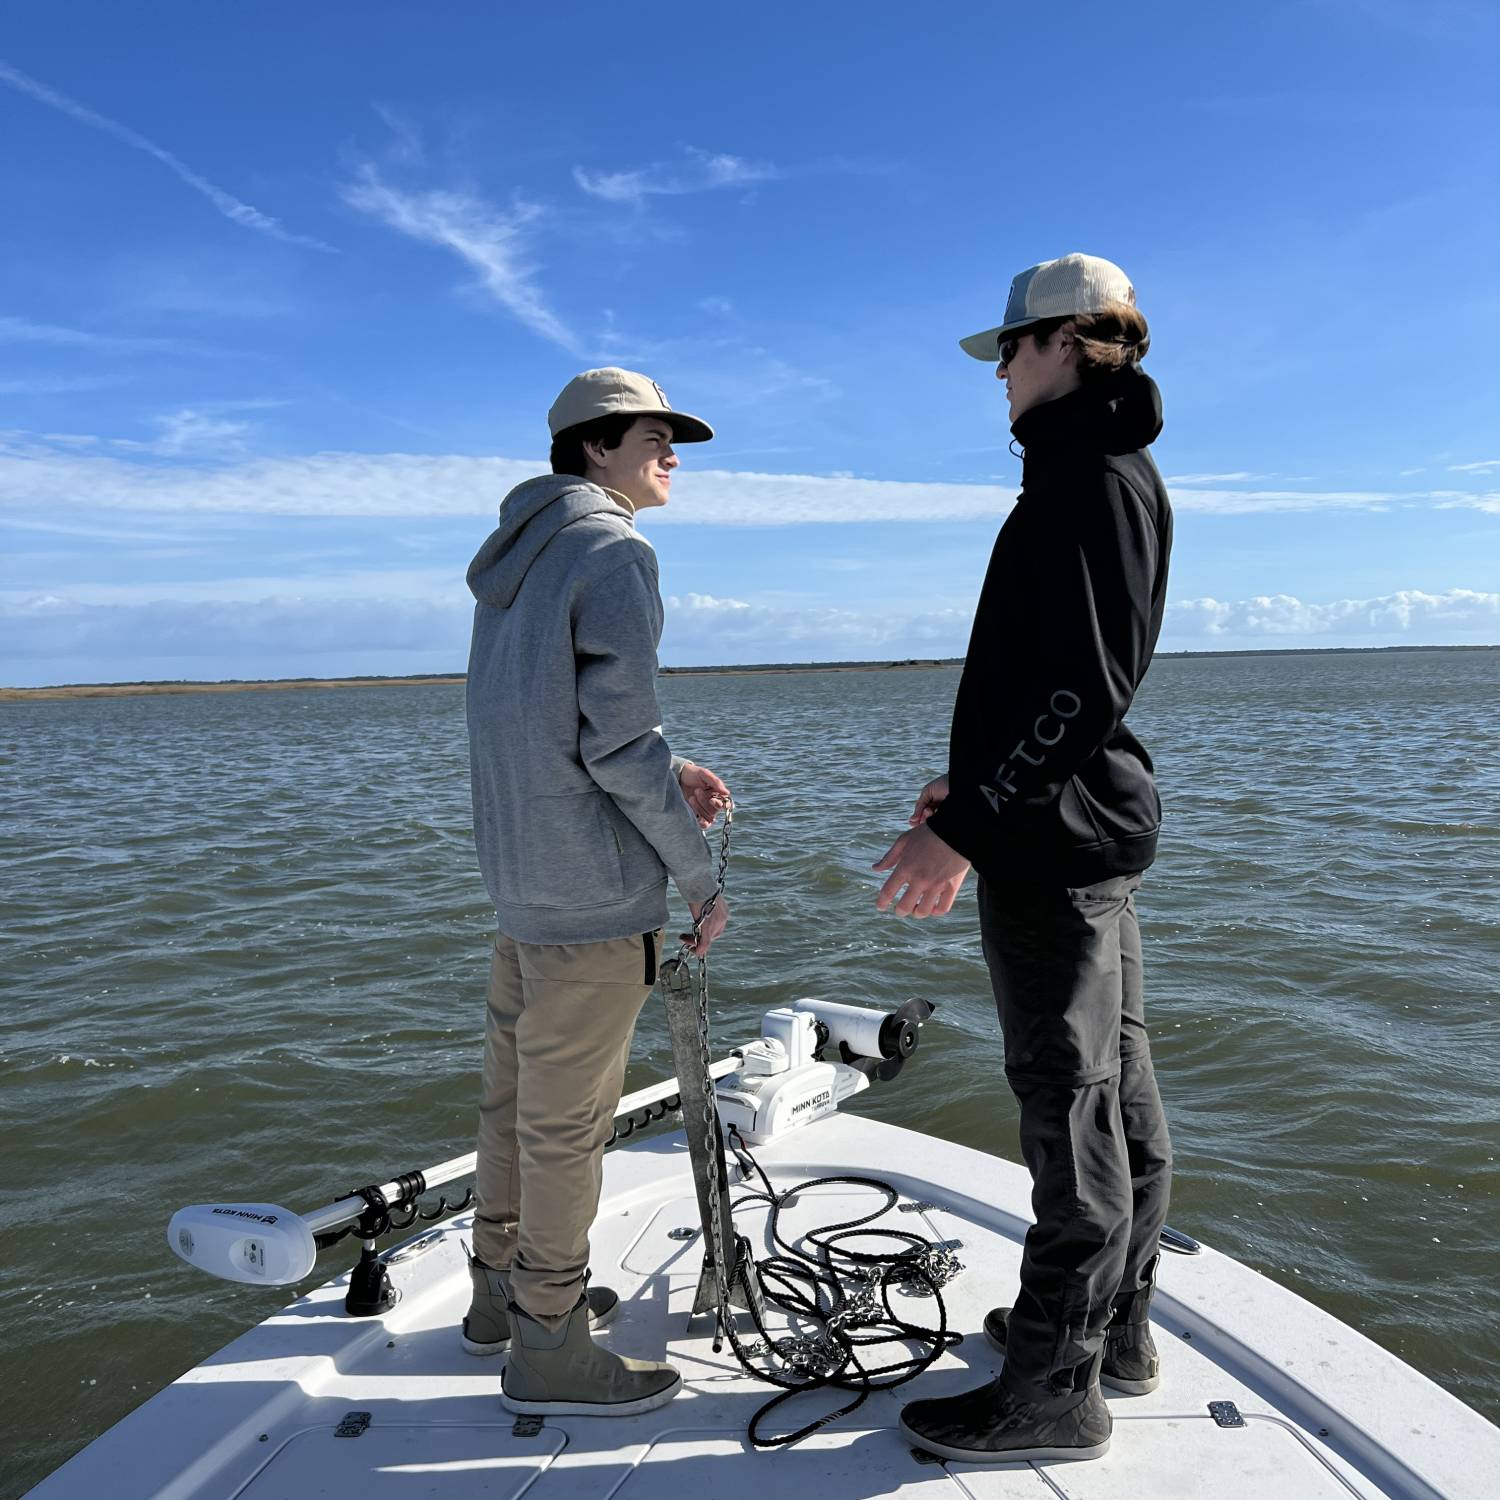 Title: Discussing strategies - On board their Sportsman Tournament 234 Bay Boat - Location: Santee Bay. Participating in the Photo Contest #SportsmanJanuary2022